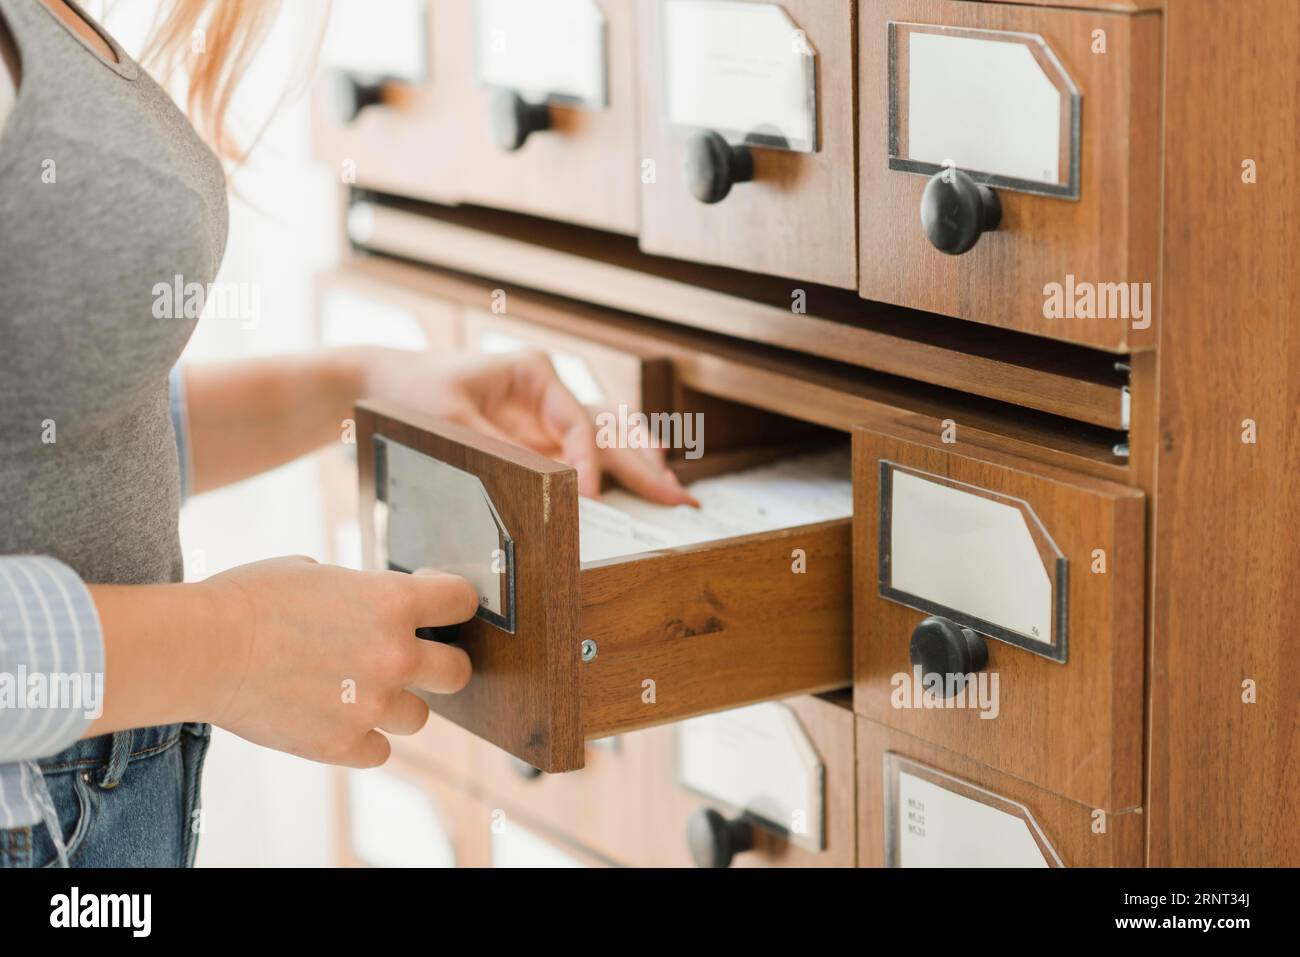 Crop librarian searching bibliographic item Stock Photo